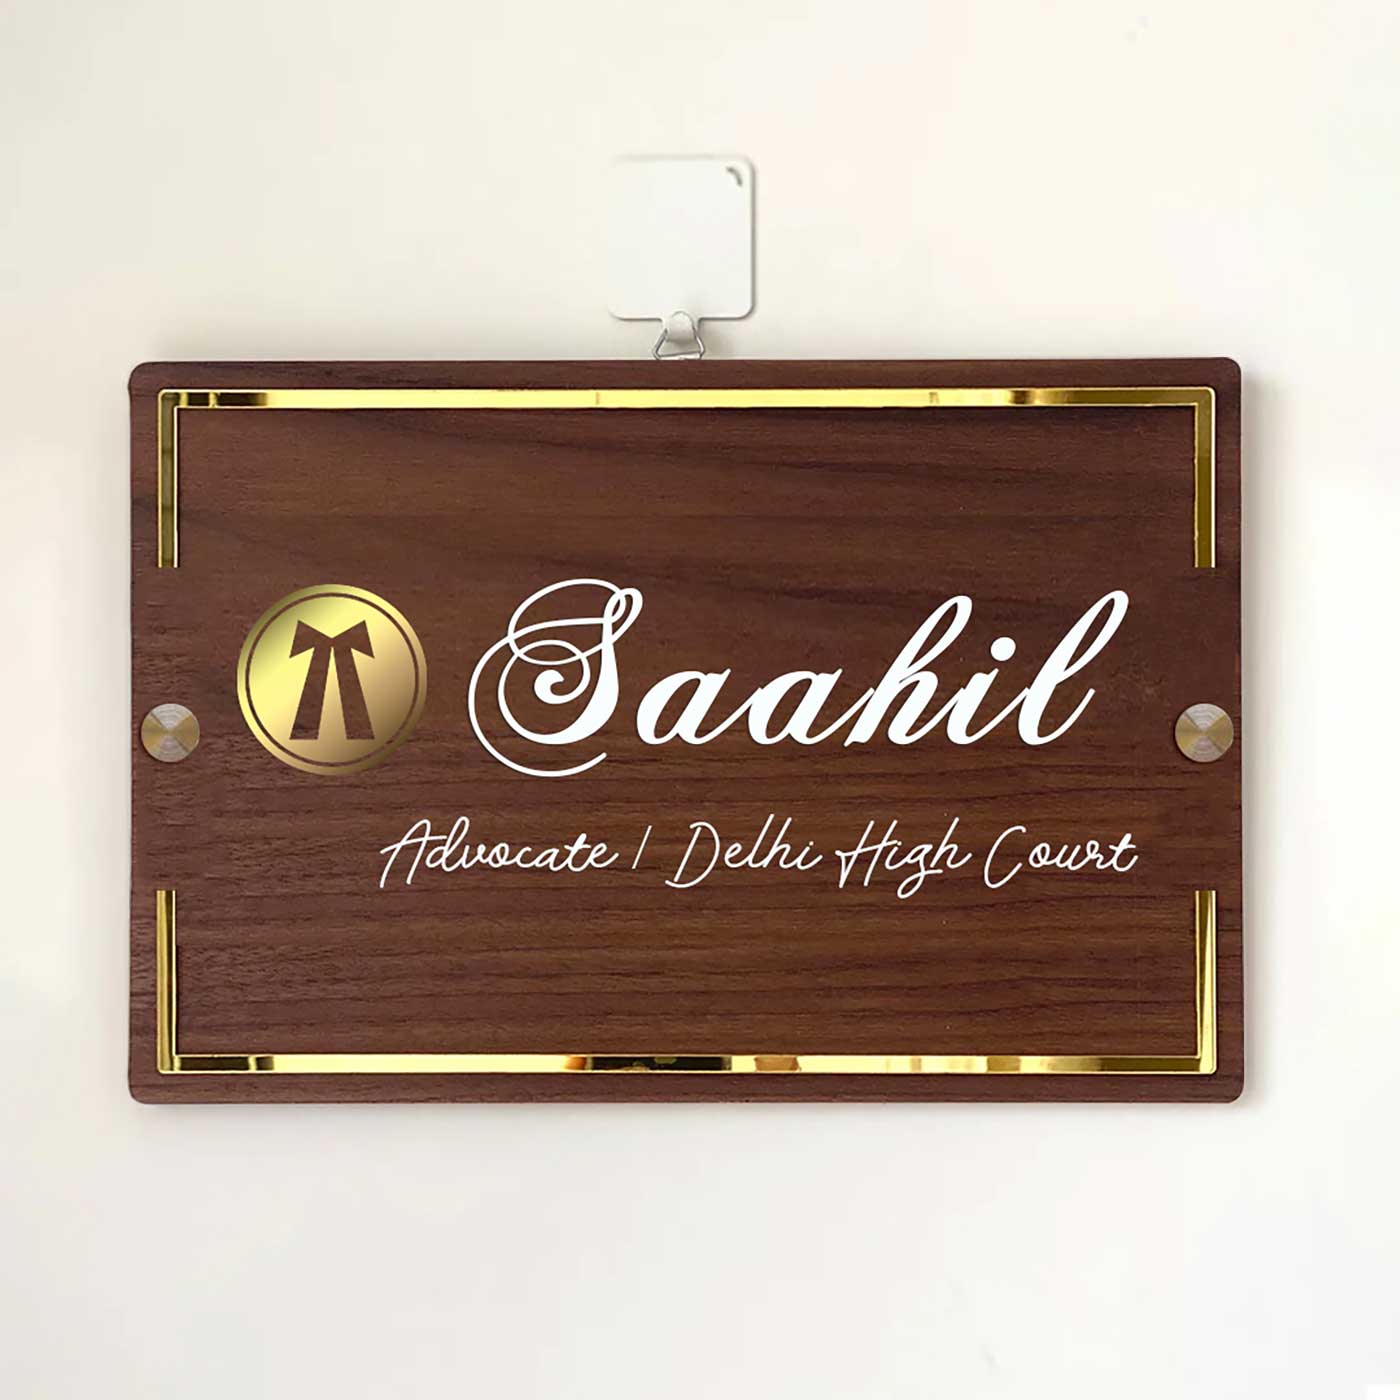 Desk Name Plate For Advocate | Advocate Name Plate For Table Desk :  Amazon.in: Car & Motorbike